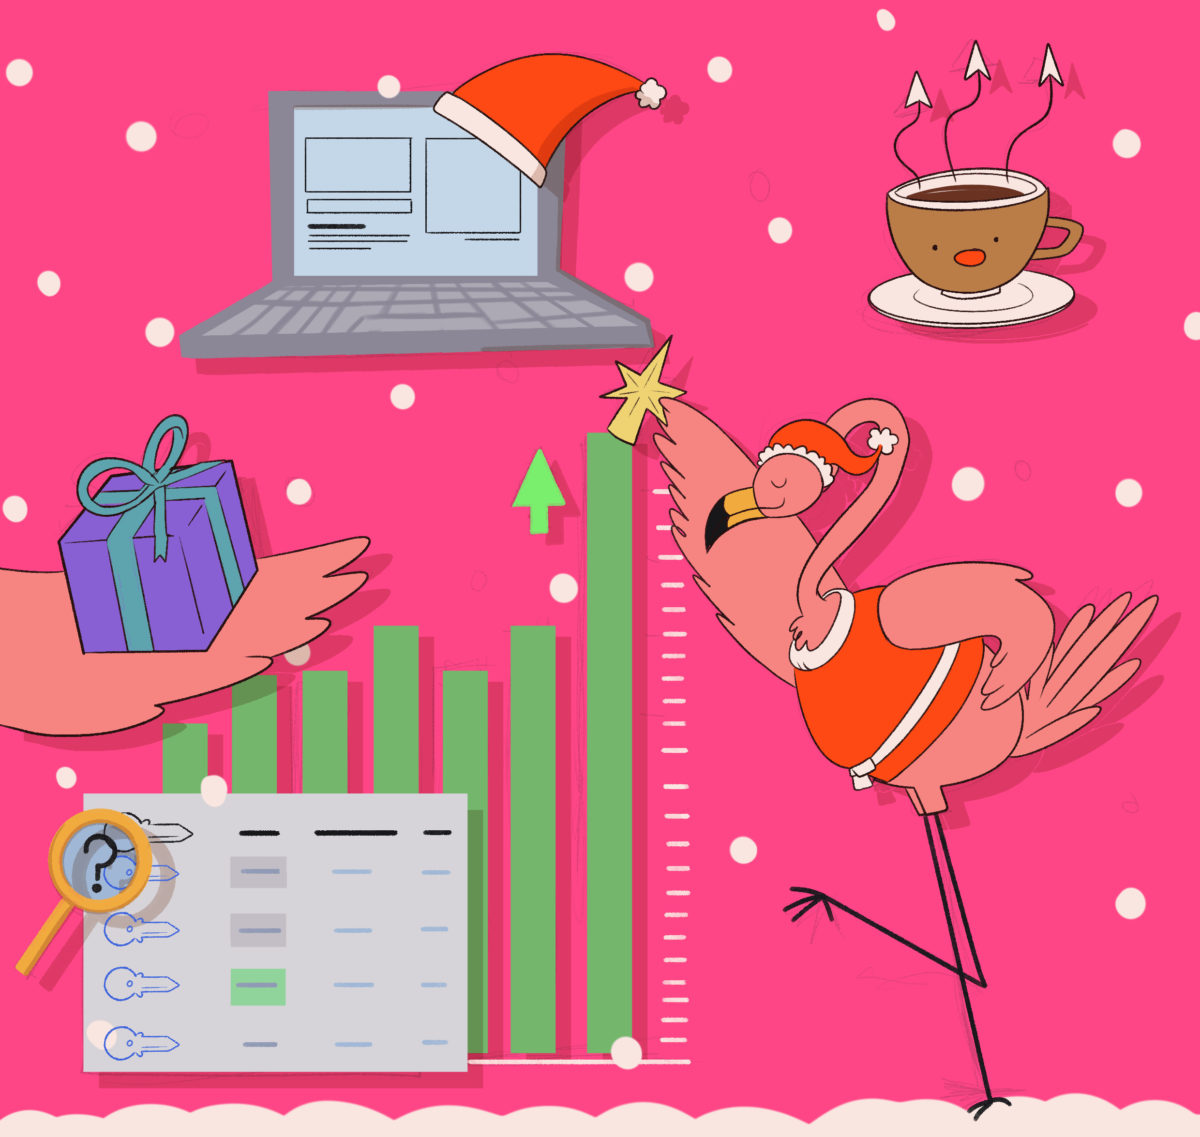 Illustration of a whimsical holiday-themed concept with a flamingo in a santa hat, festive elements, and symbols representing productivity and technology.